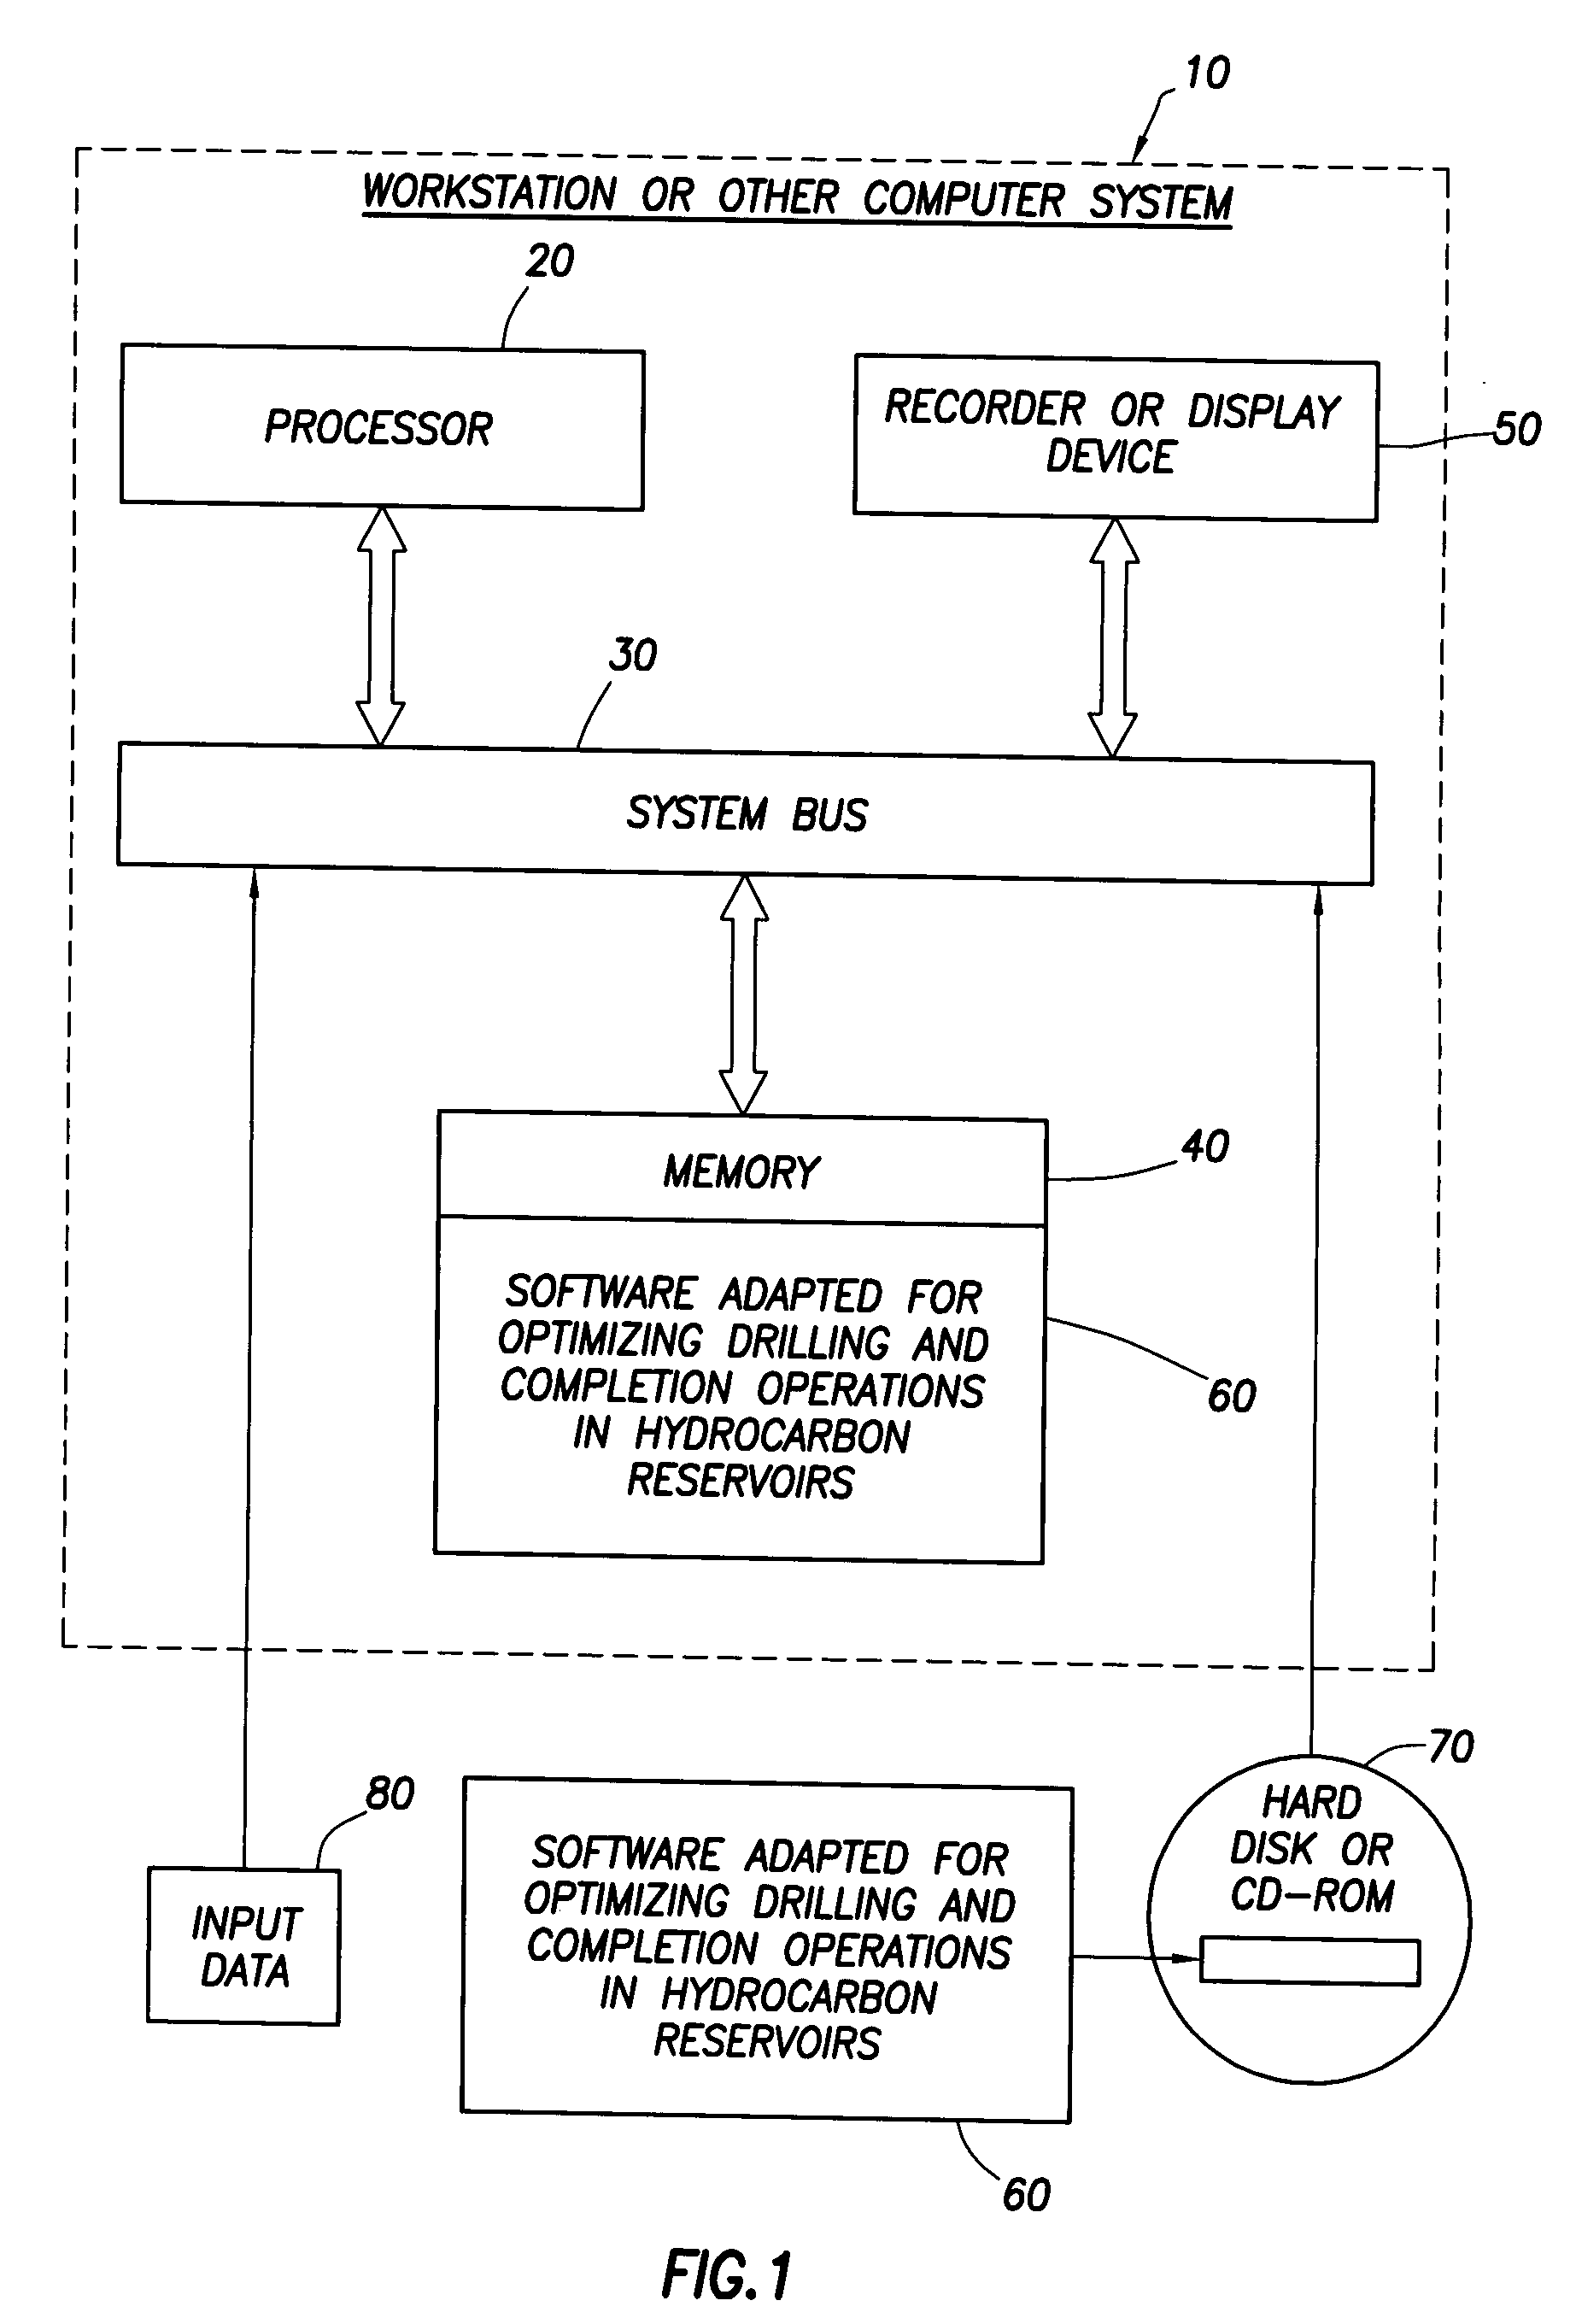 Method for designing and optimizing drilling and completion operations in hydrocarbon reservoirs